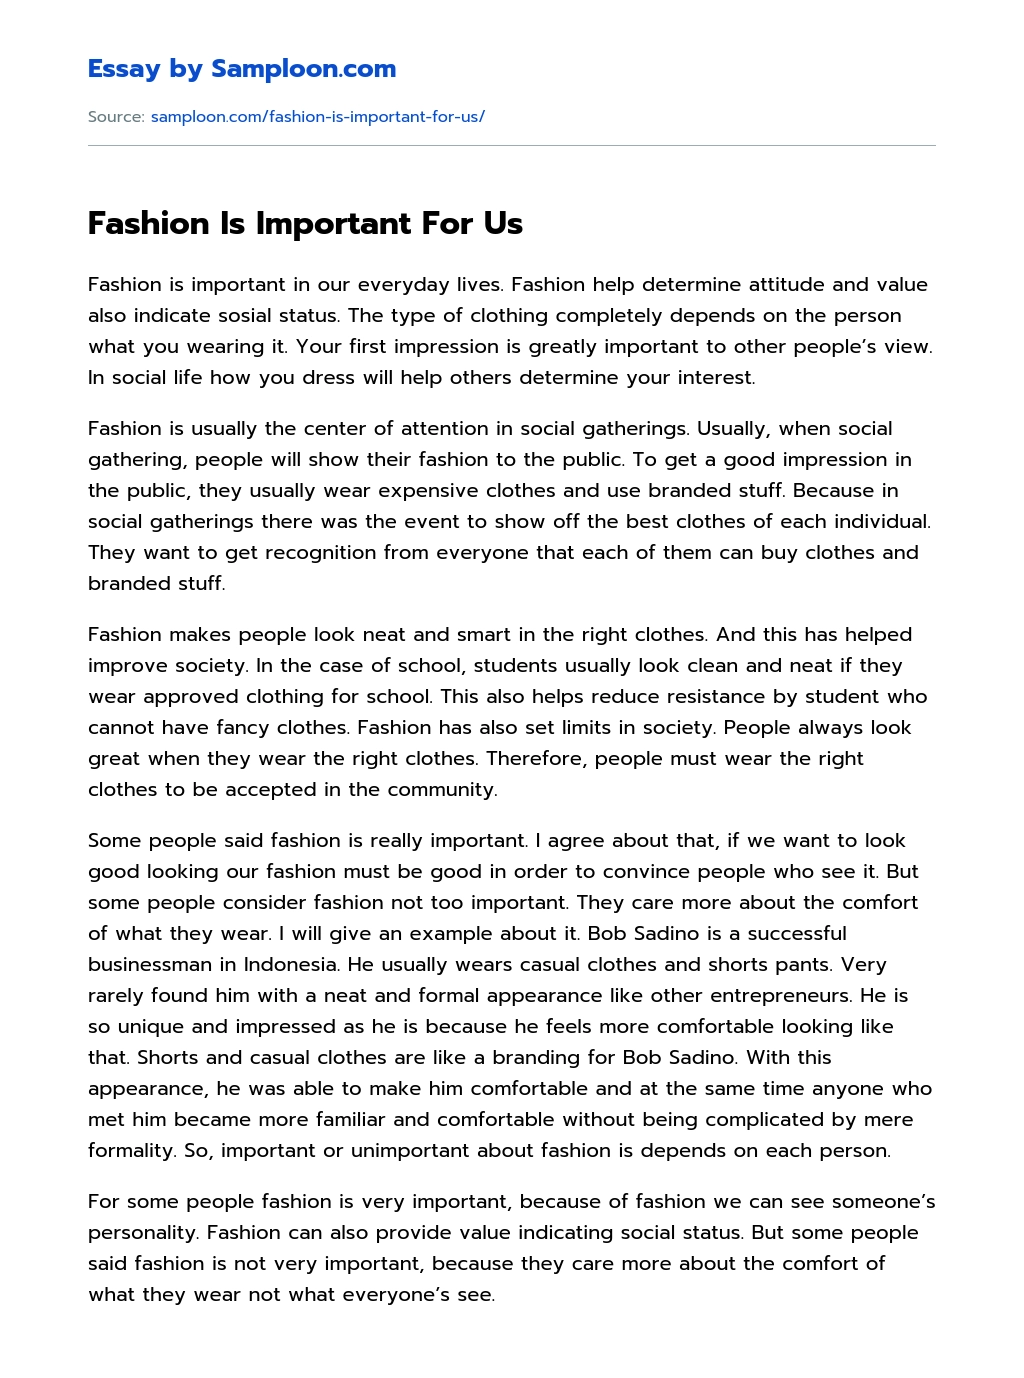 why is fashion important essay